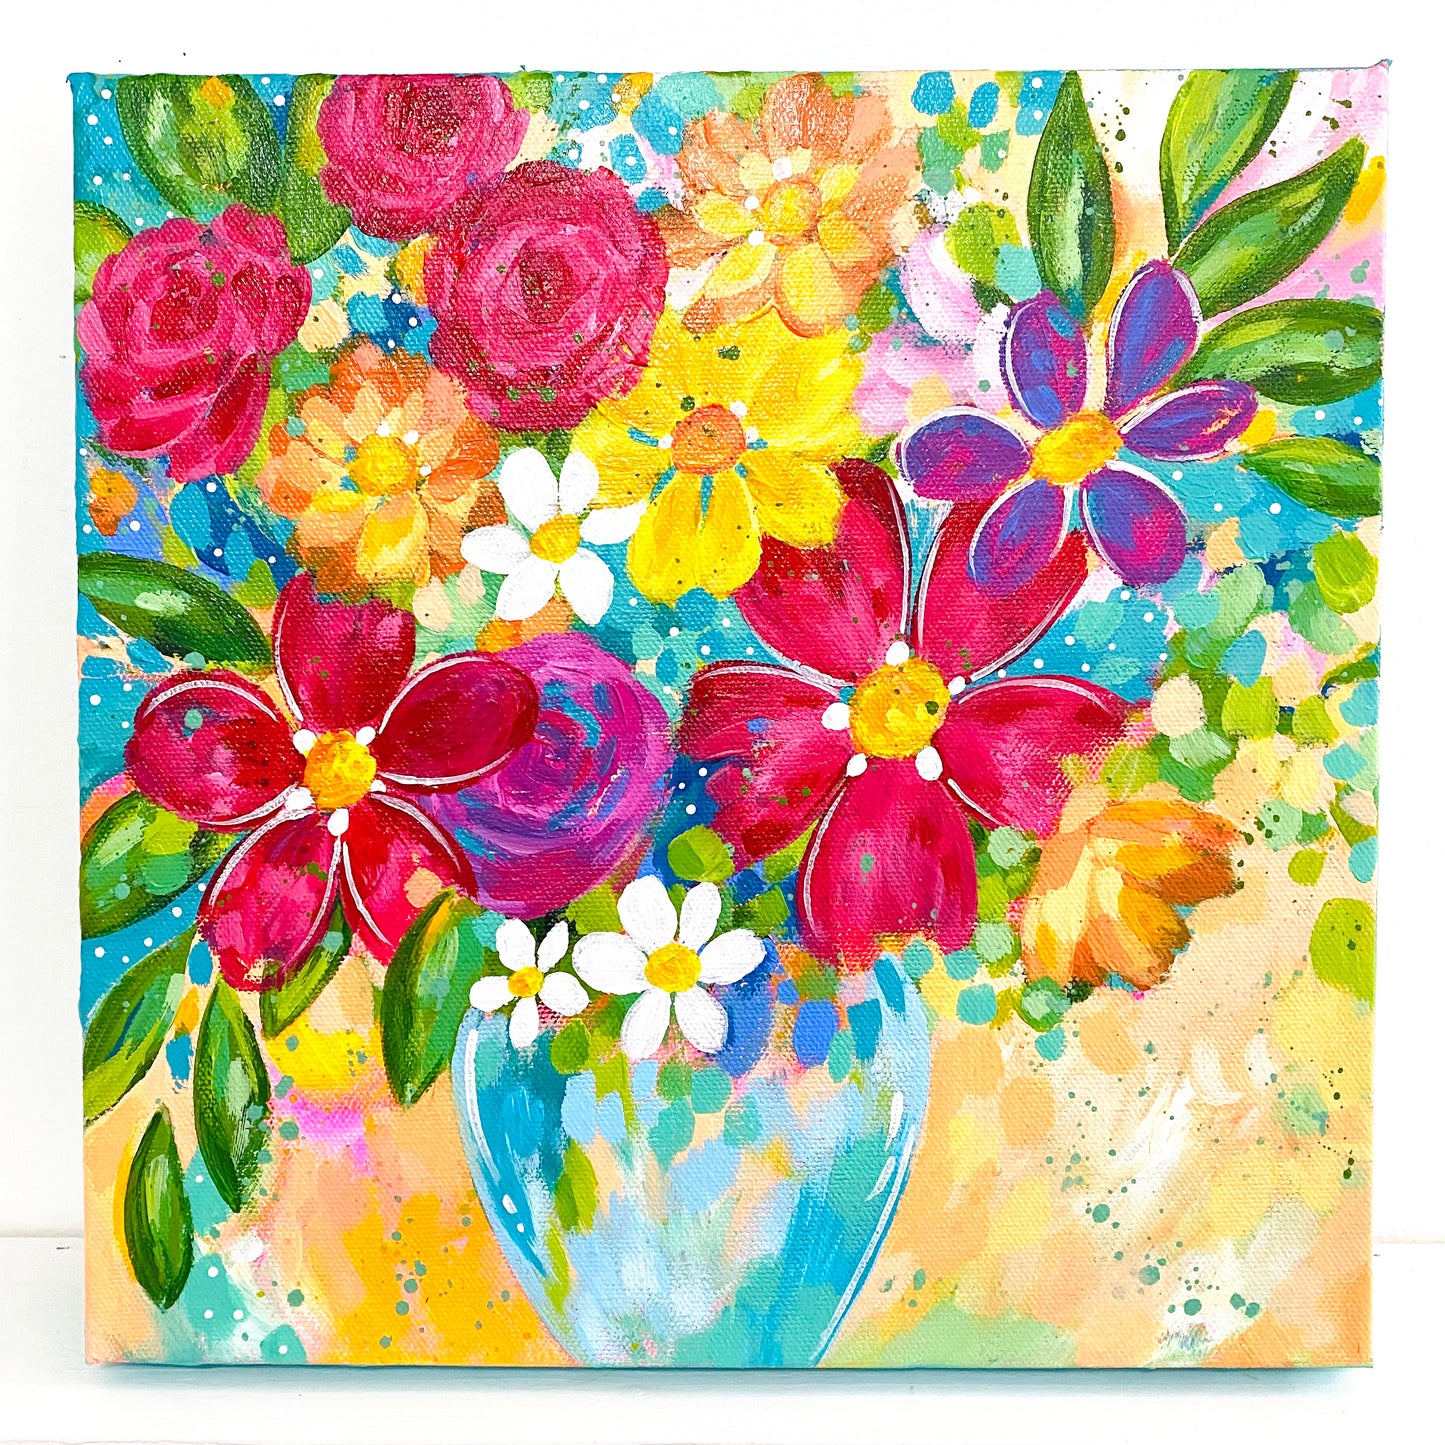 “Confetti Flowers" 12x12 inch original floral painting on canvas